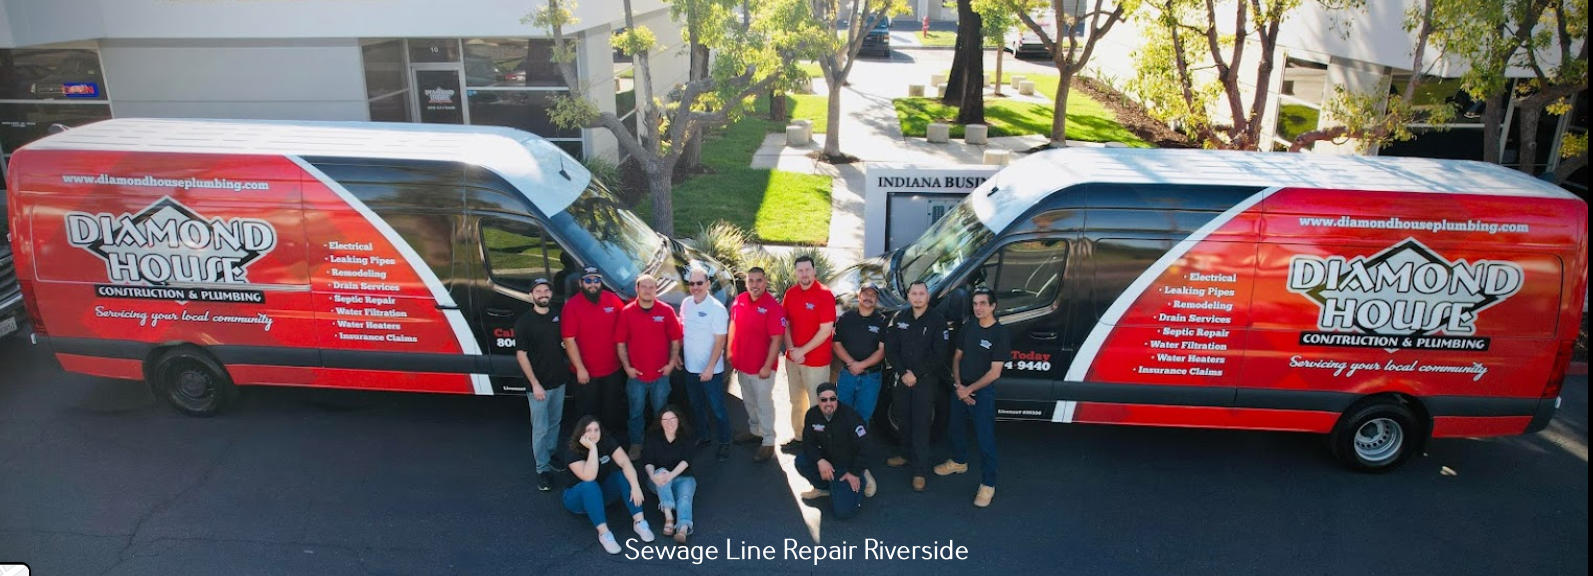 Diamond House Plumbing Prides Itself in Being a Top-Rated Sewer Line Repair Company